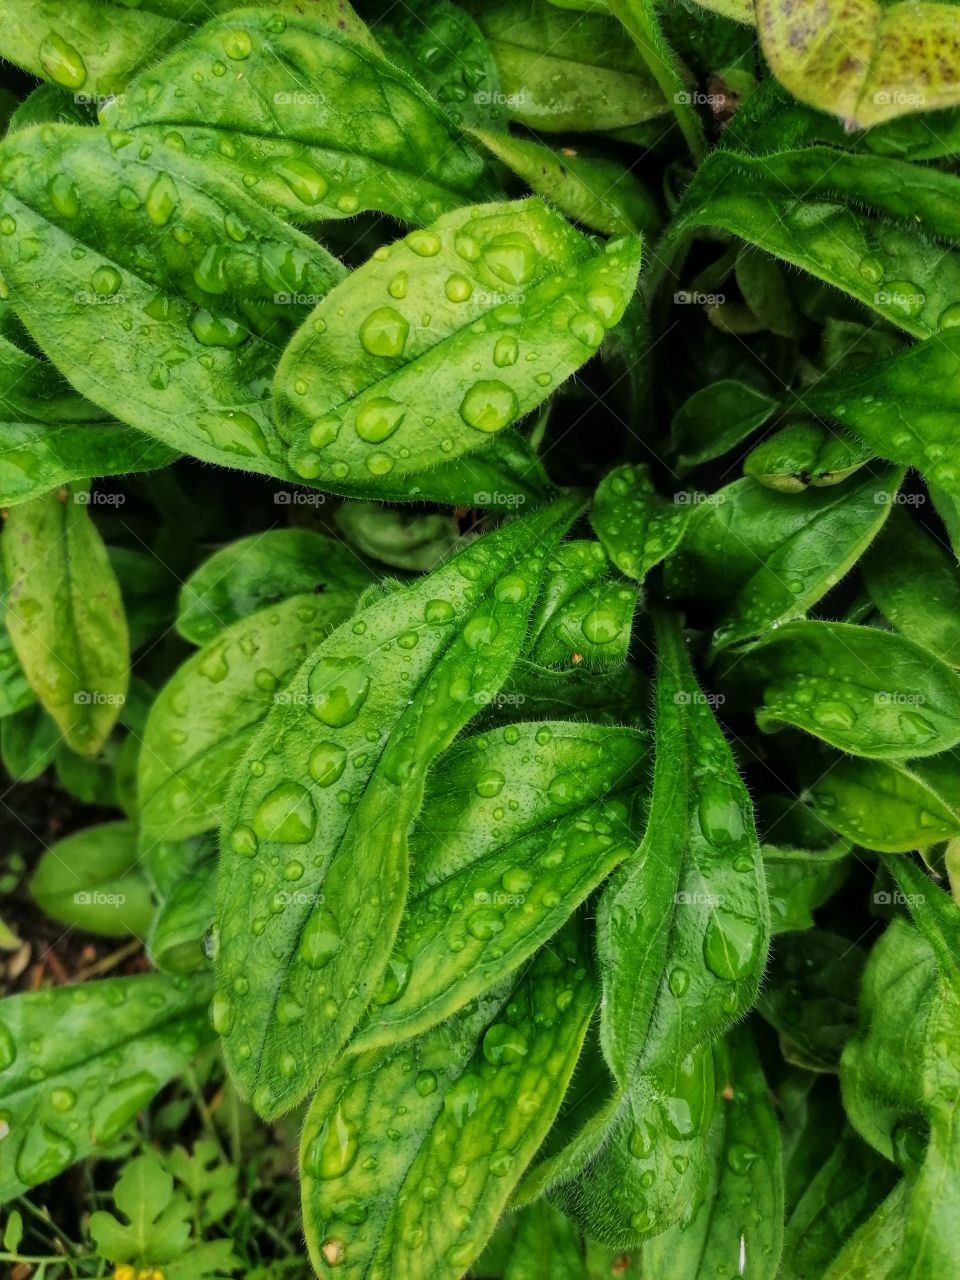 Dew drops on green plant leaves.